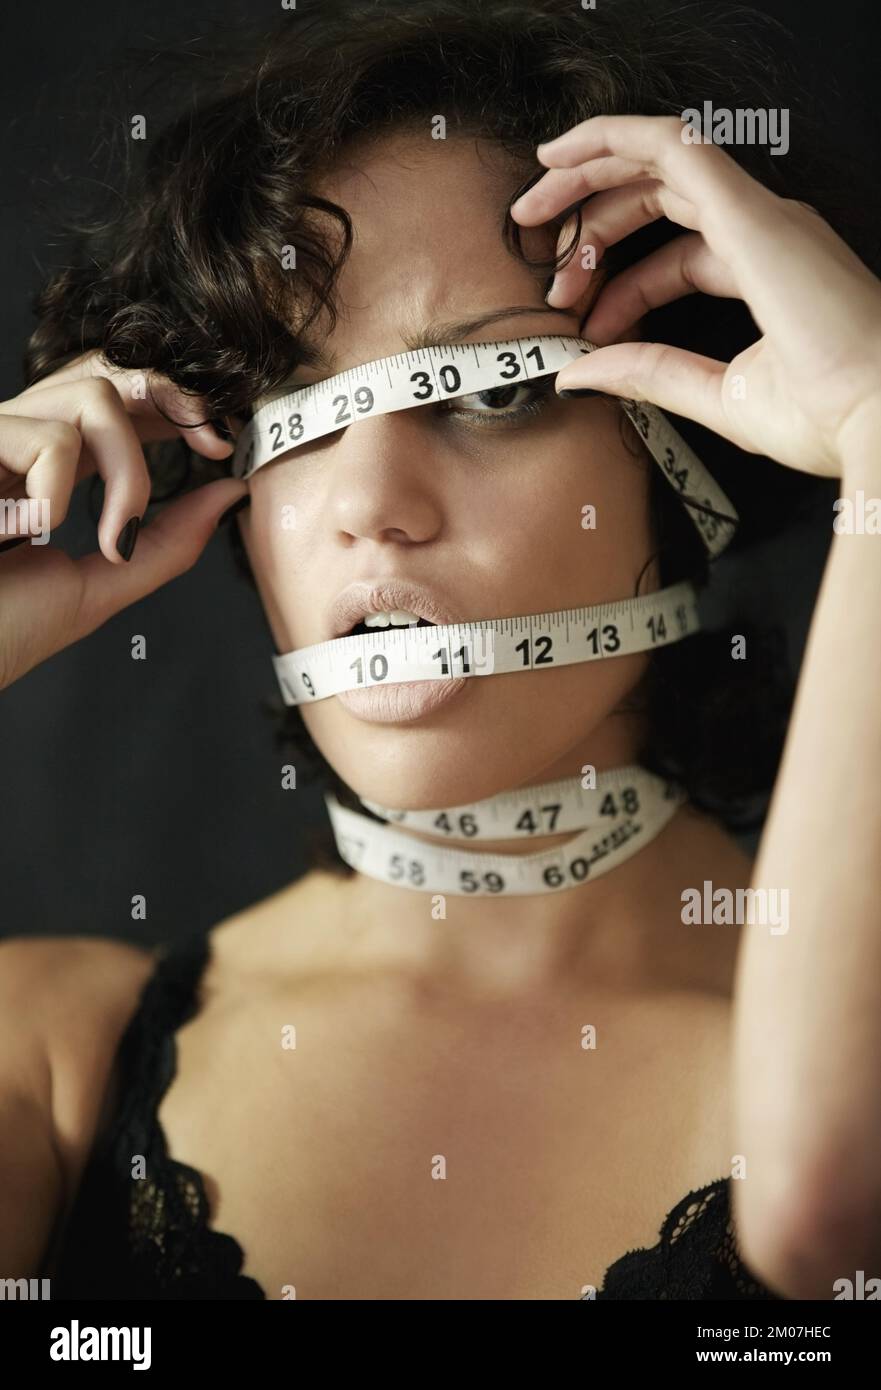 Obsessed with losing inches. Concept shot of an anorexic woman with measuring tape wrapped around her head. Stock Photo